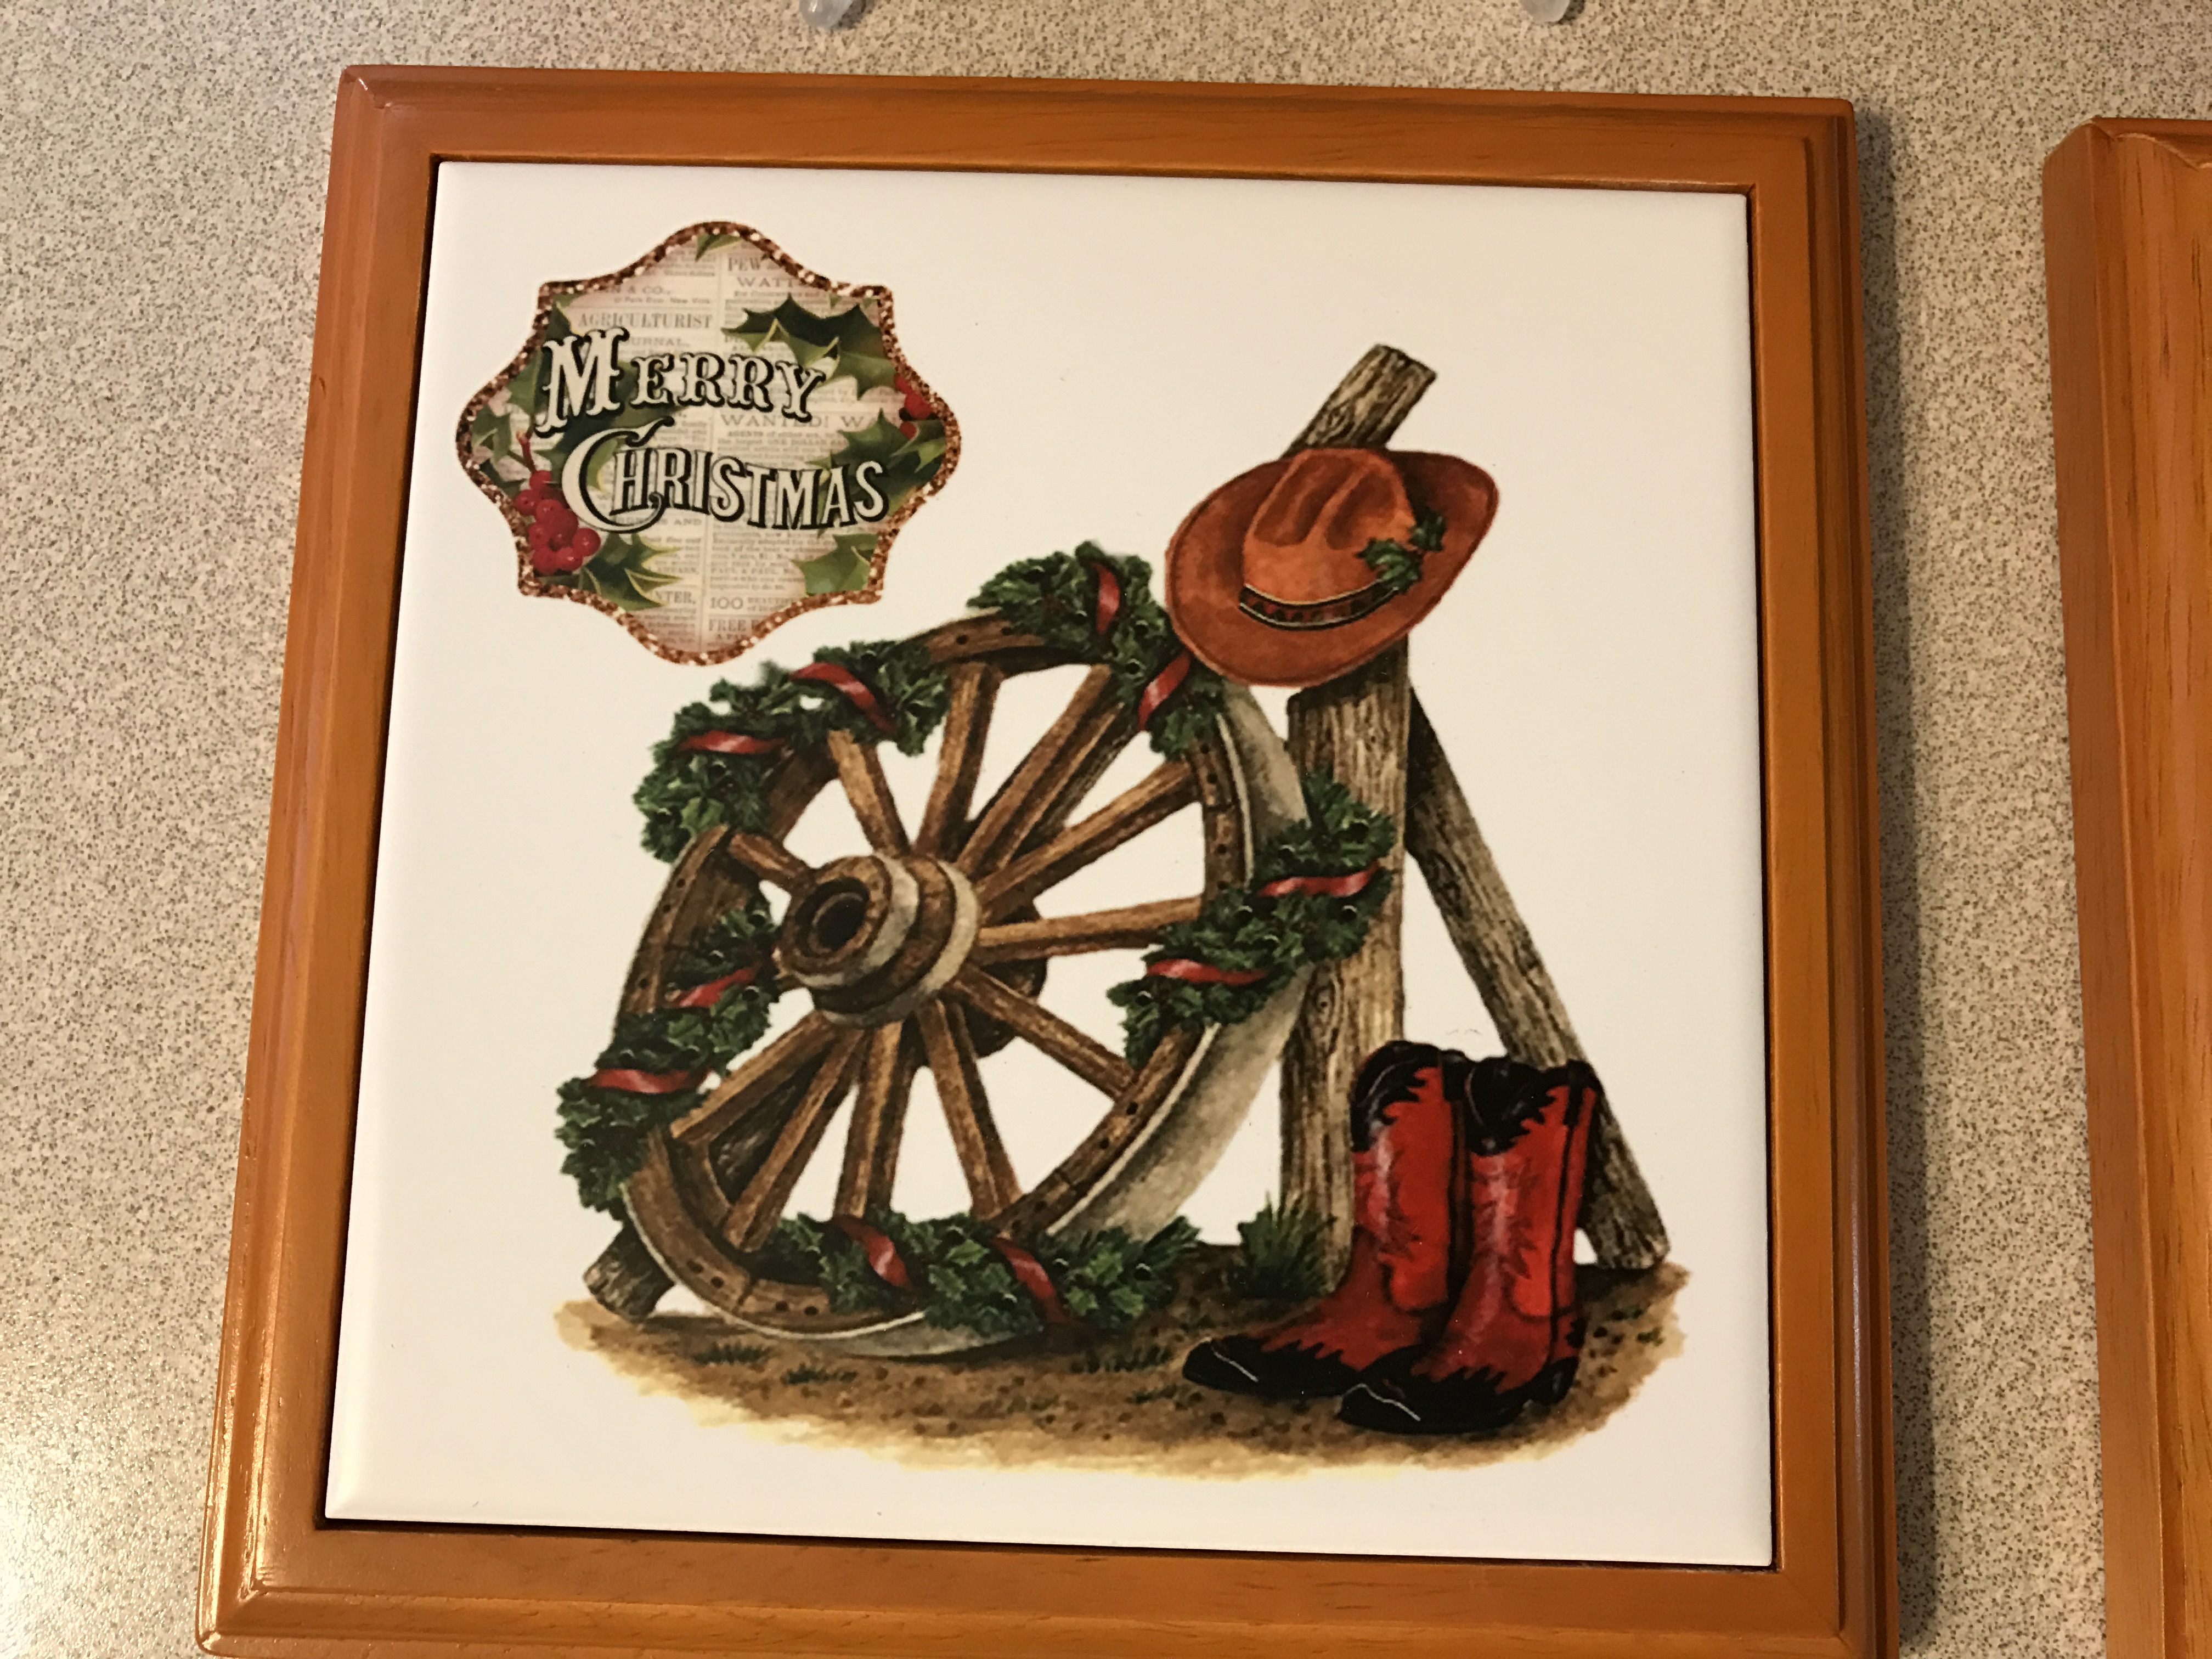 Trivet made with sublimation printing